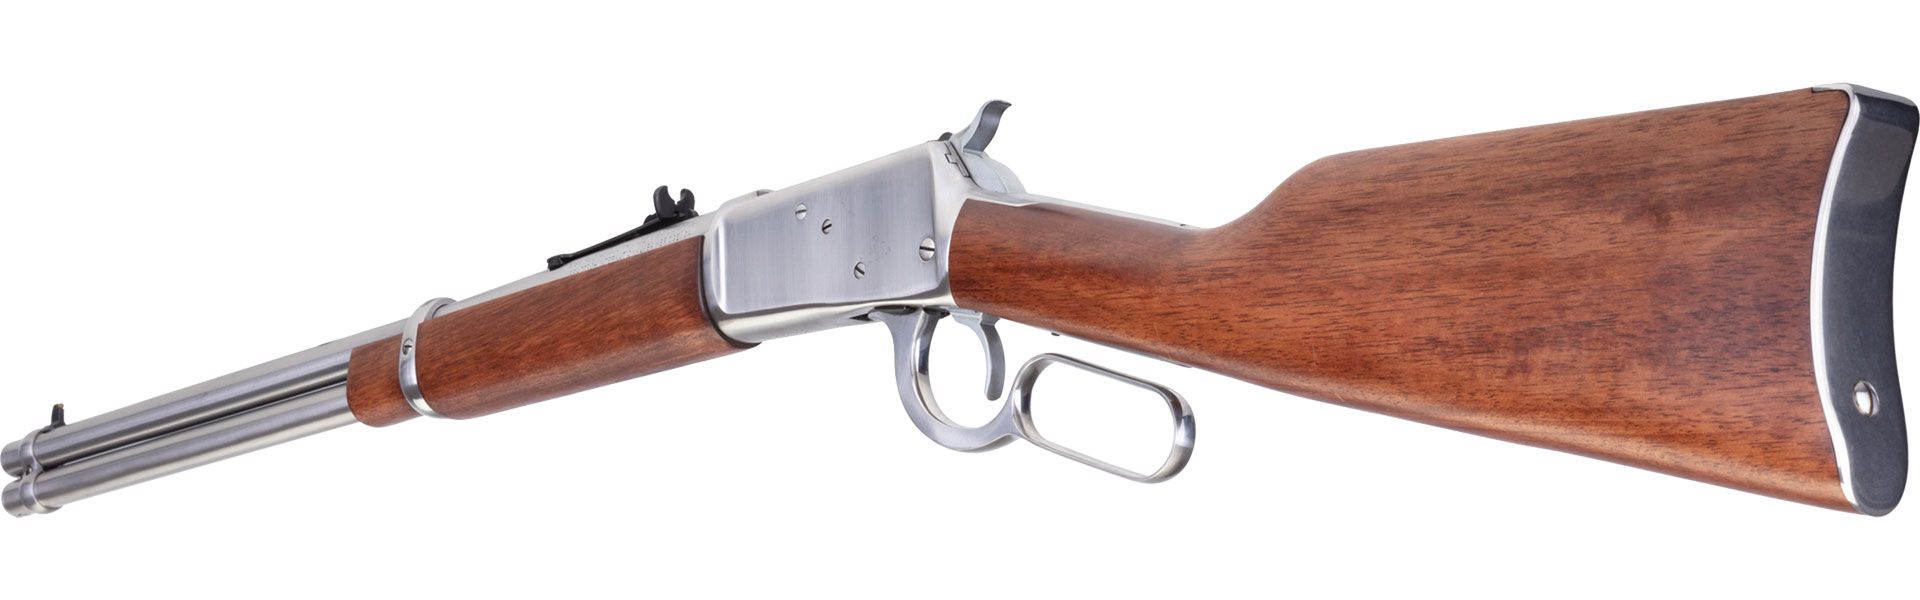 R92 Brazilian Hardwood, .45 COLT, Polished Stainless, 20 In.